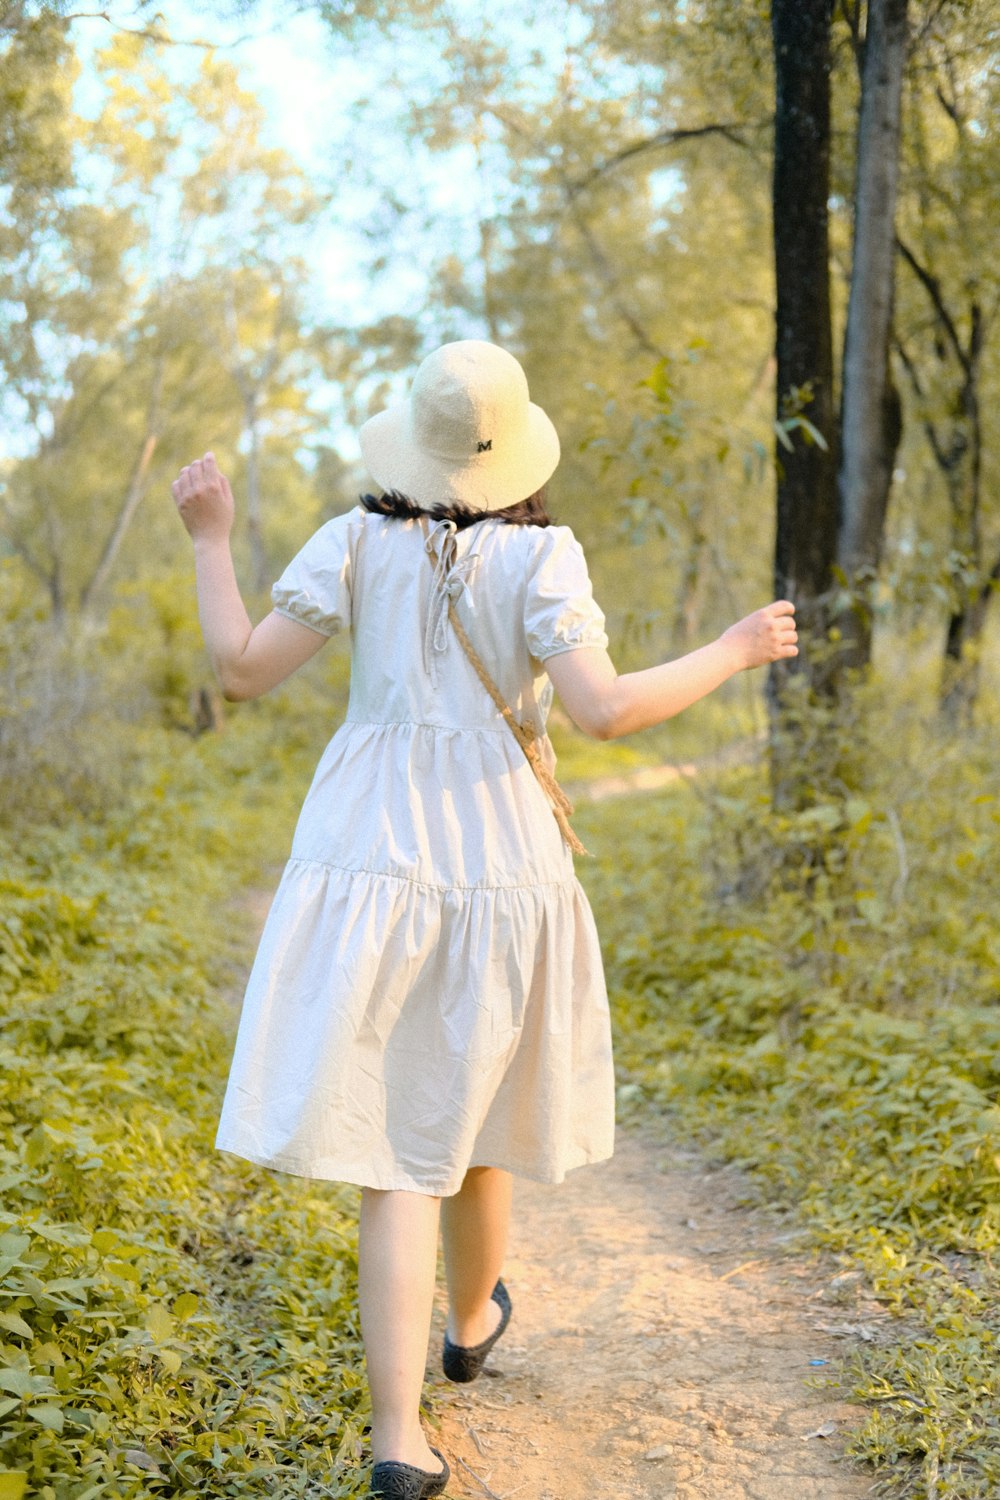 a person wearing a white dress and hat walking on a path in the woods